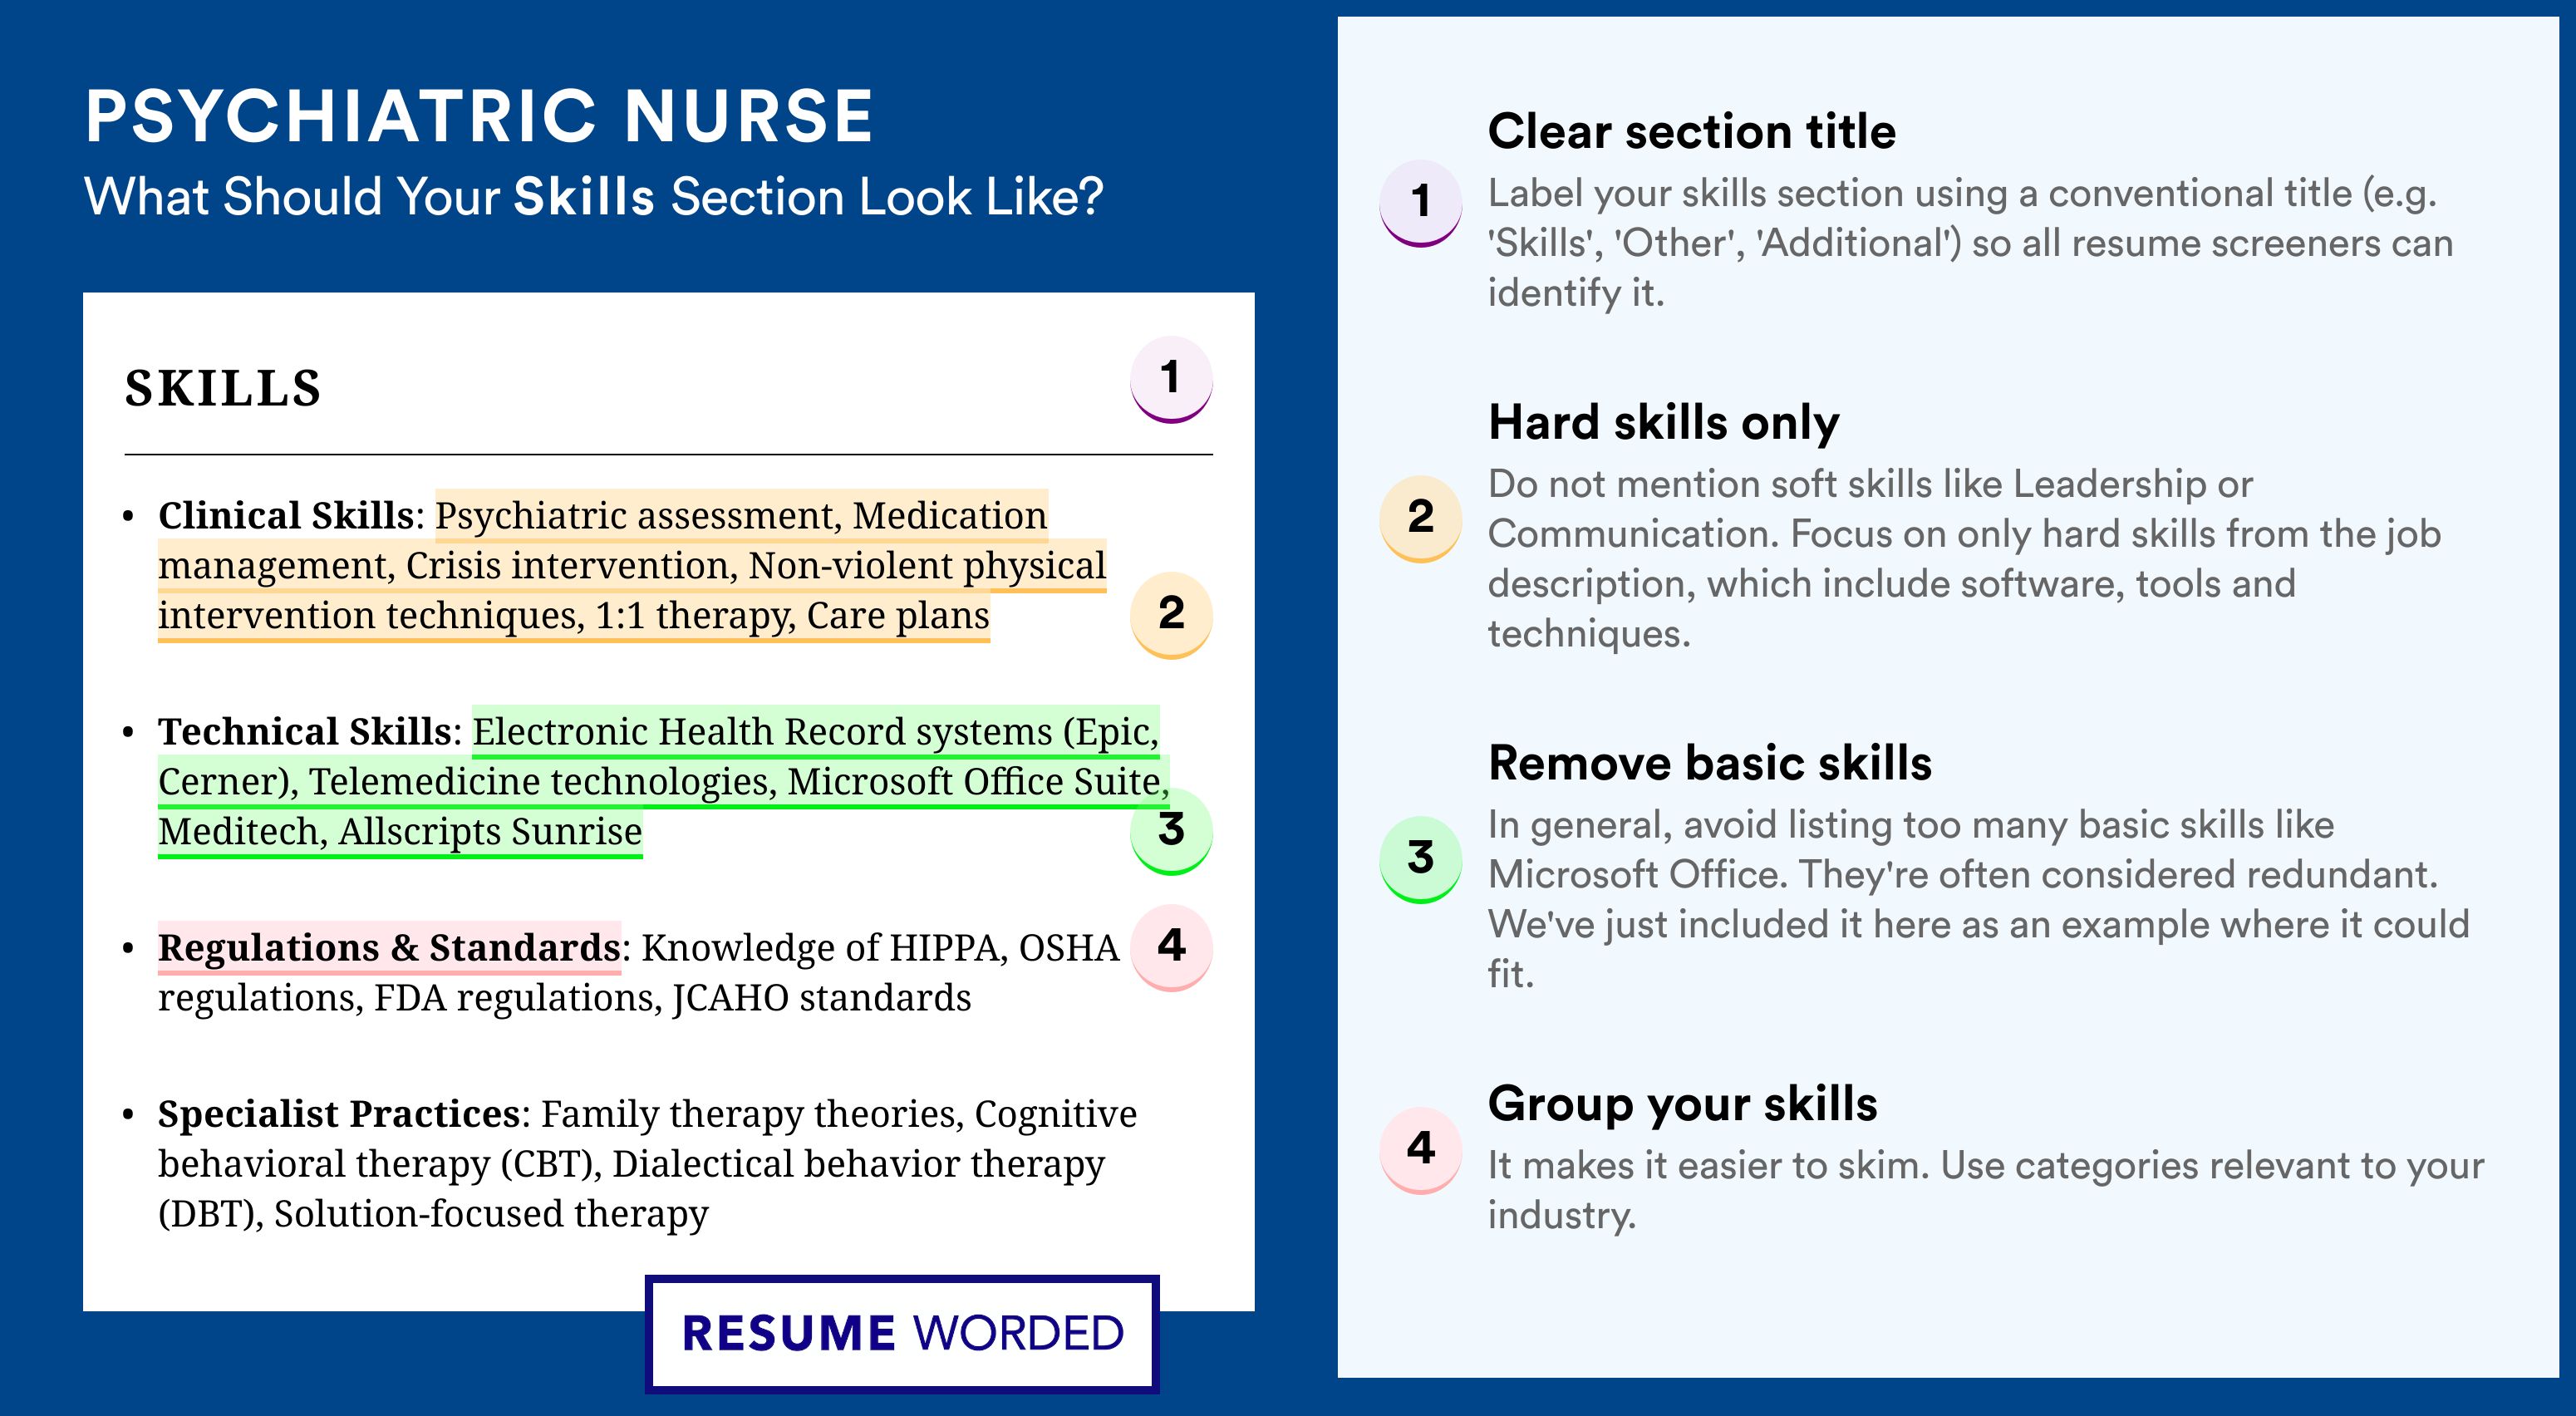 How To Write Your Skills Section - Psychiatric Nurse Roles